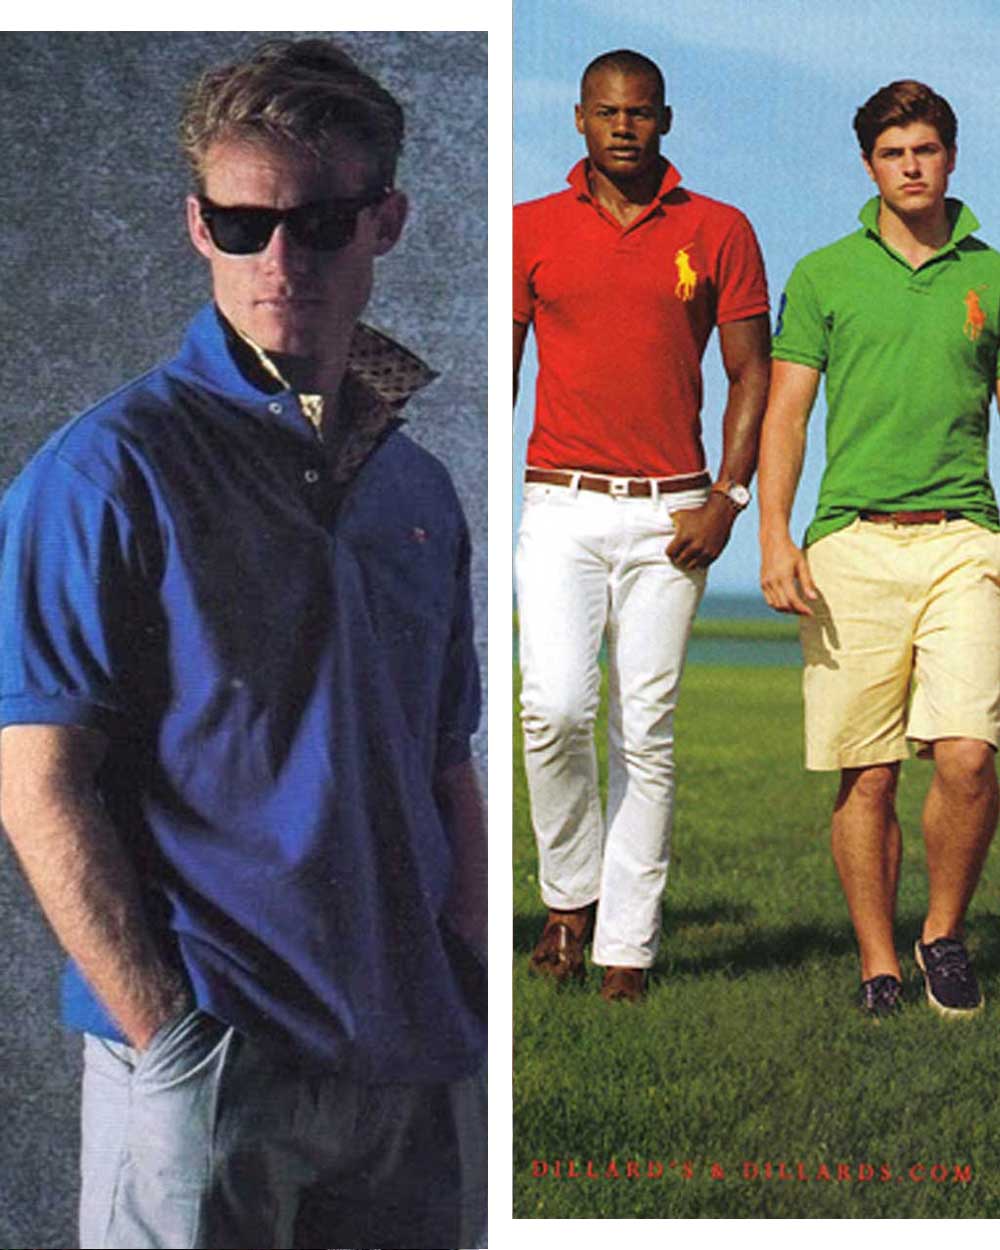 popped collar polo shirt look of the 80s